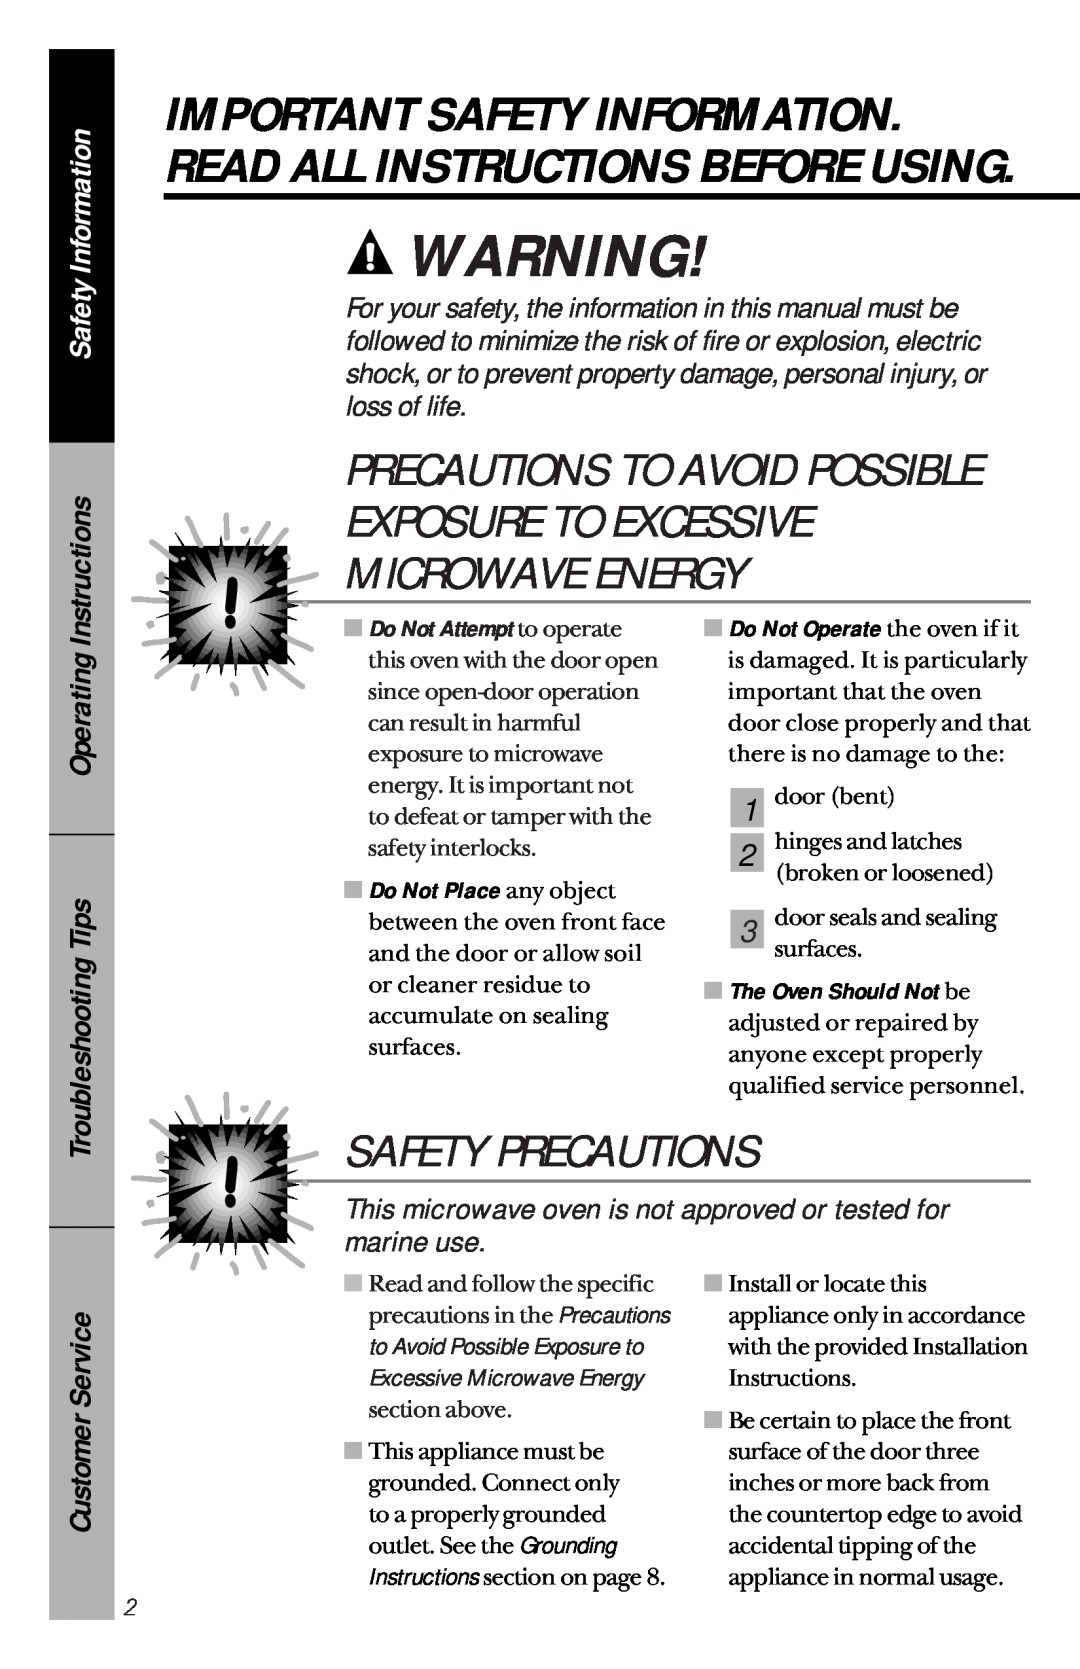 GE je1540 Exposure To Excessive Microwave Energy, Safety Precautions, Precautions To Avoid Possible, Safety Information 